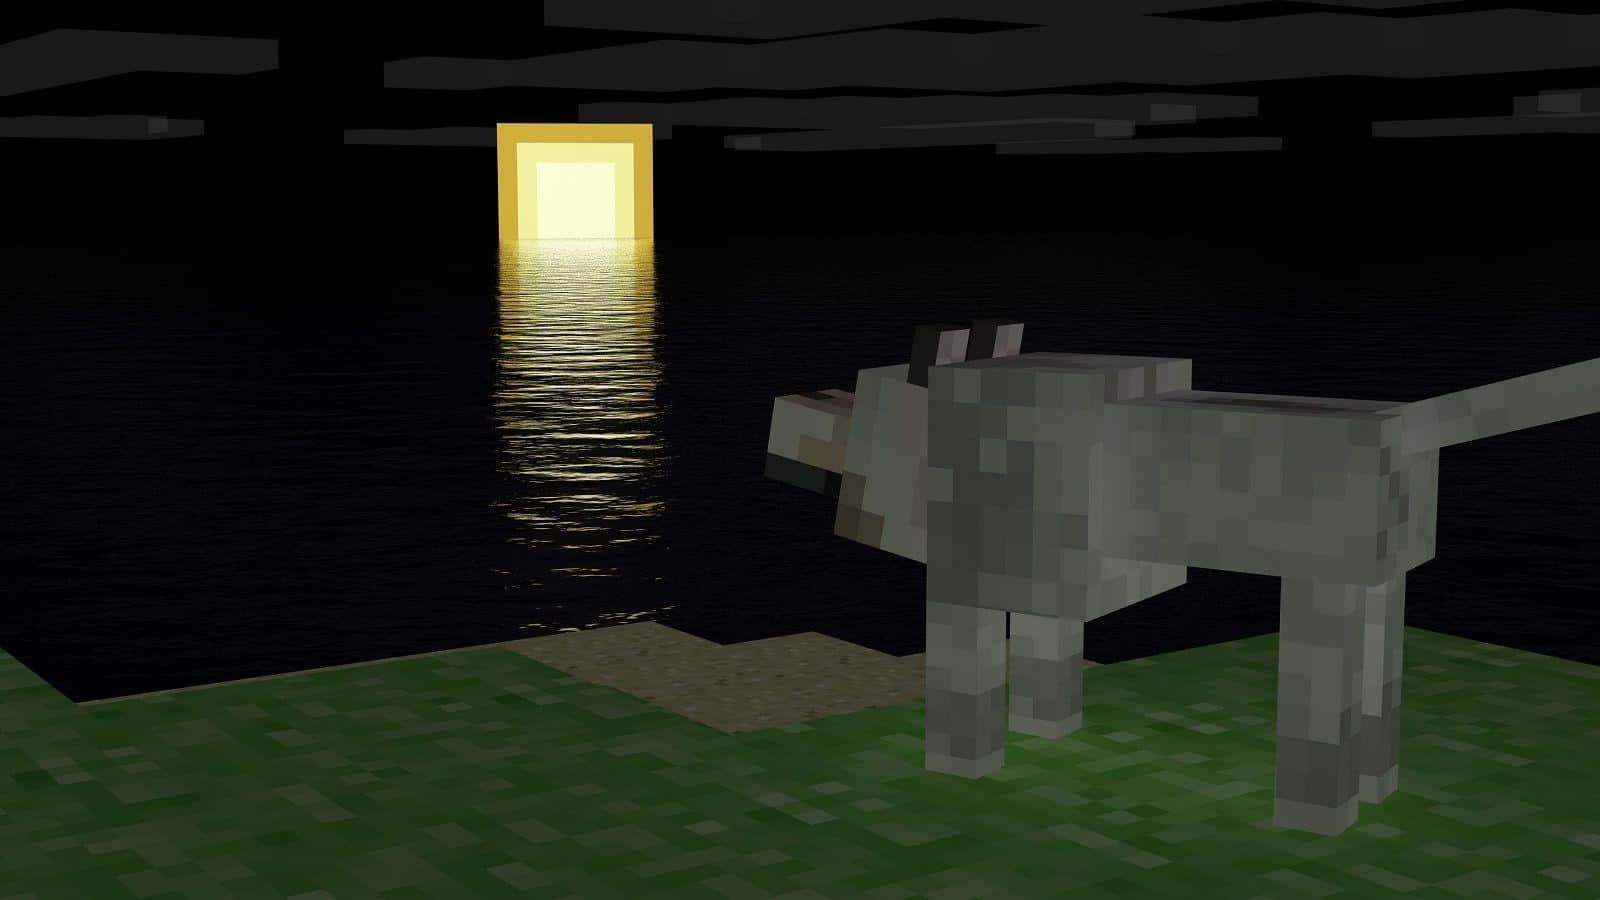 a dog standing in the water near a light